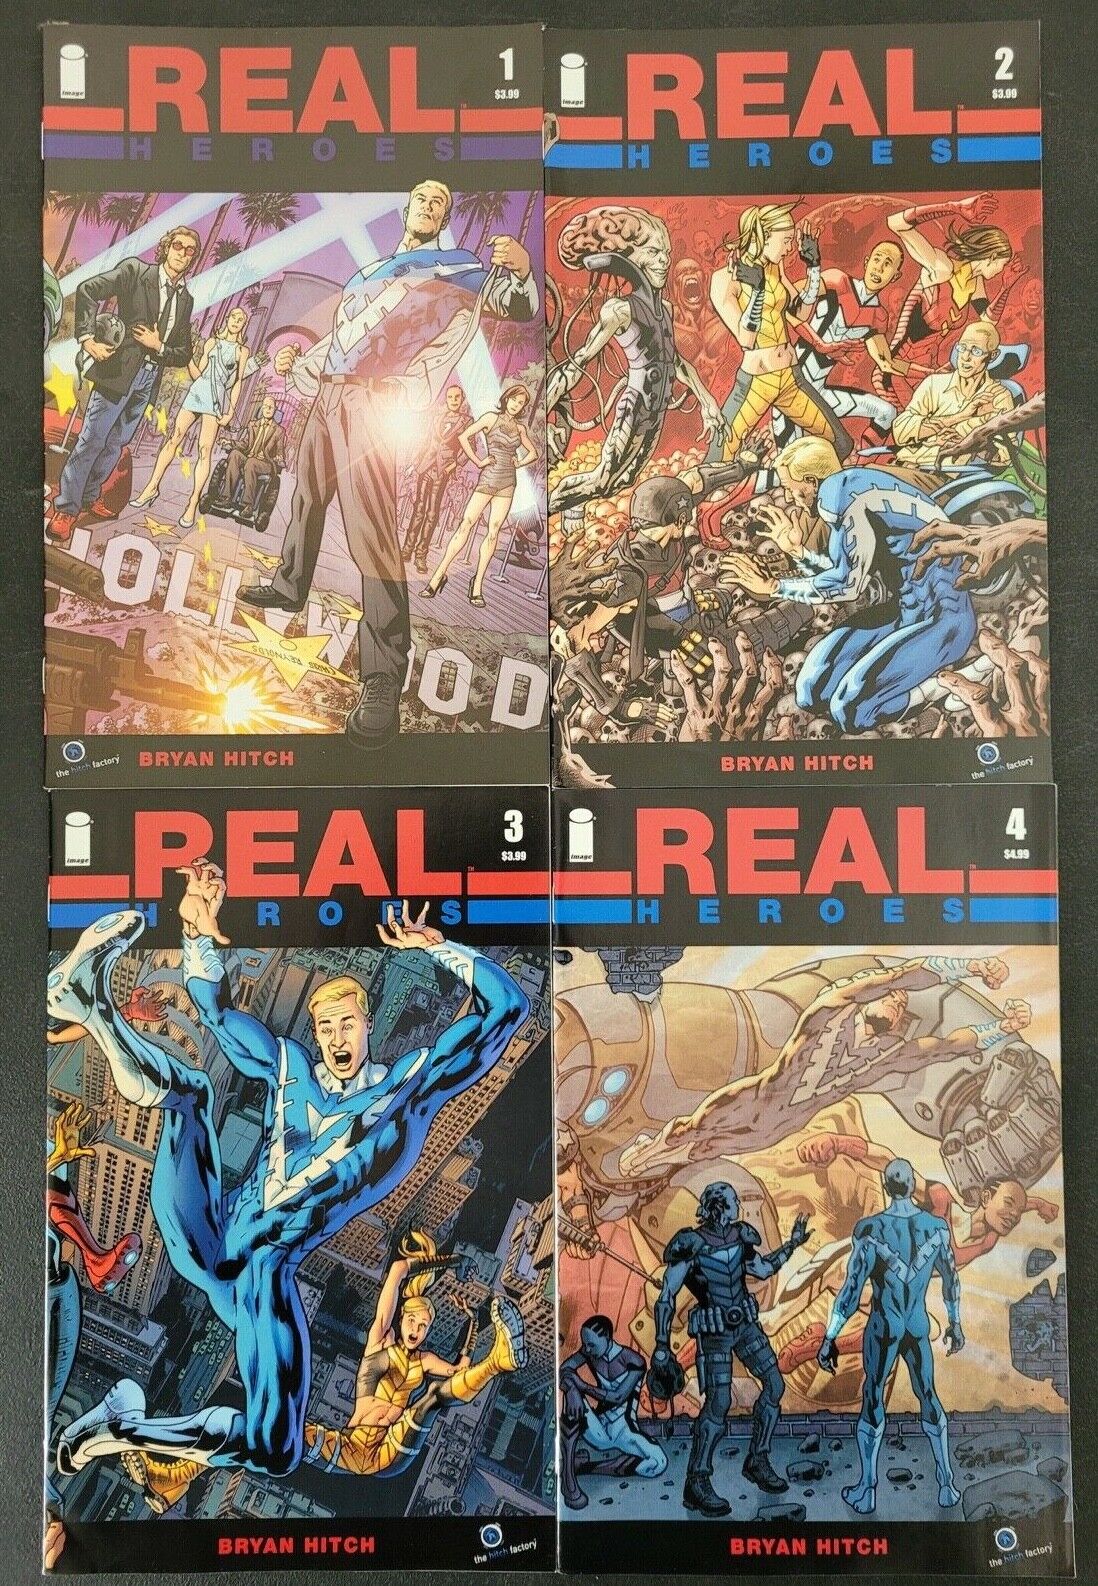 REAL HEROES #1-4 (2014) IMAGE COMICS FULL COMPLETE SERIES BRYAN HITCH STORY+ART